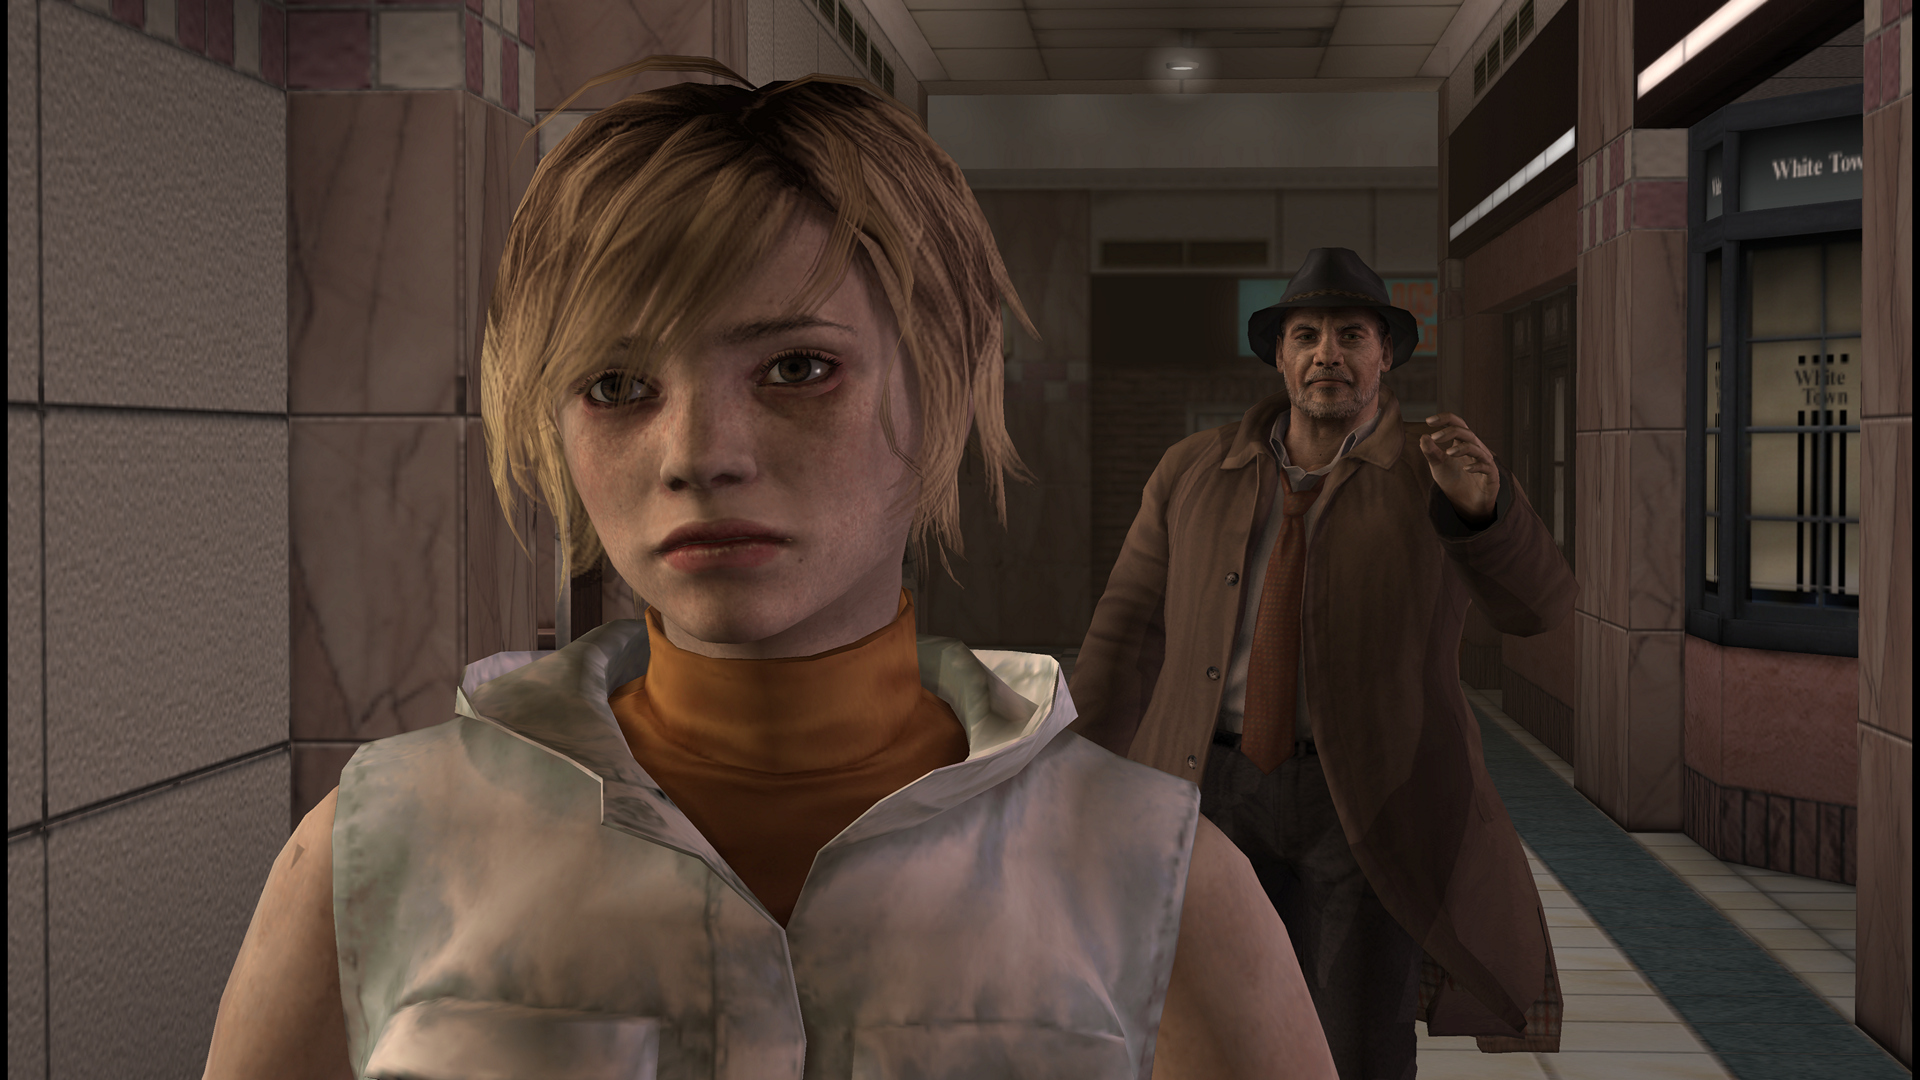 silent-hill-3-10-reasons-why-it-was-one-hell-of-a-game-page-3